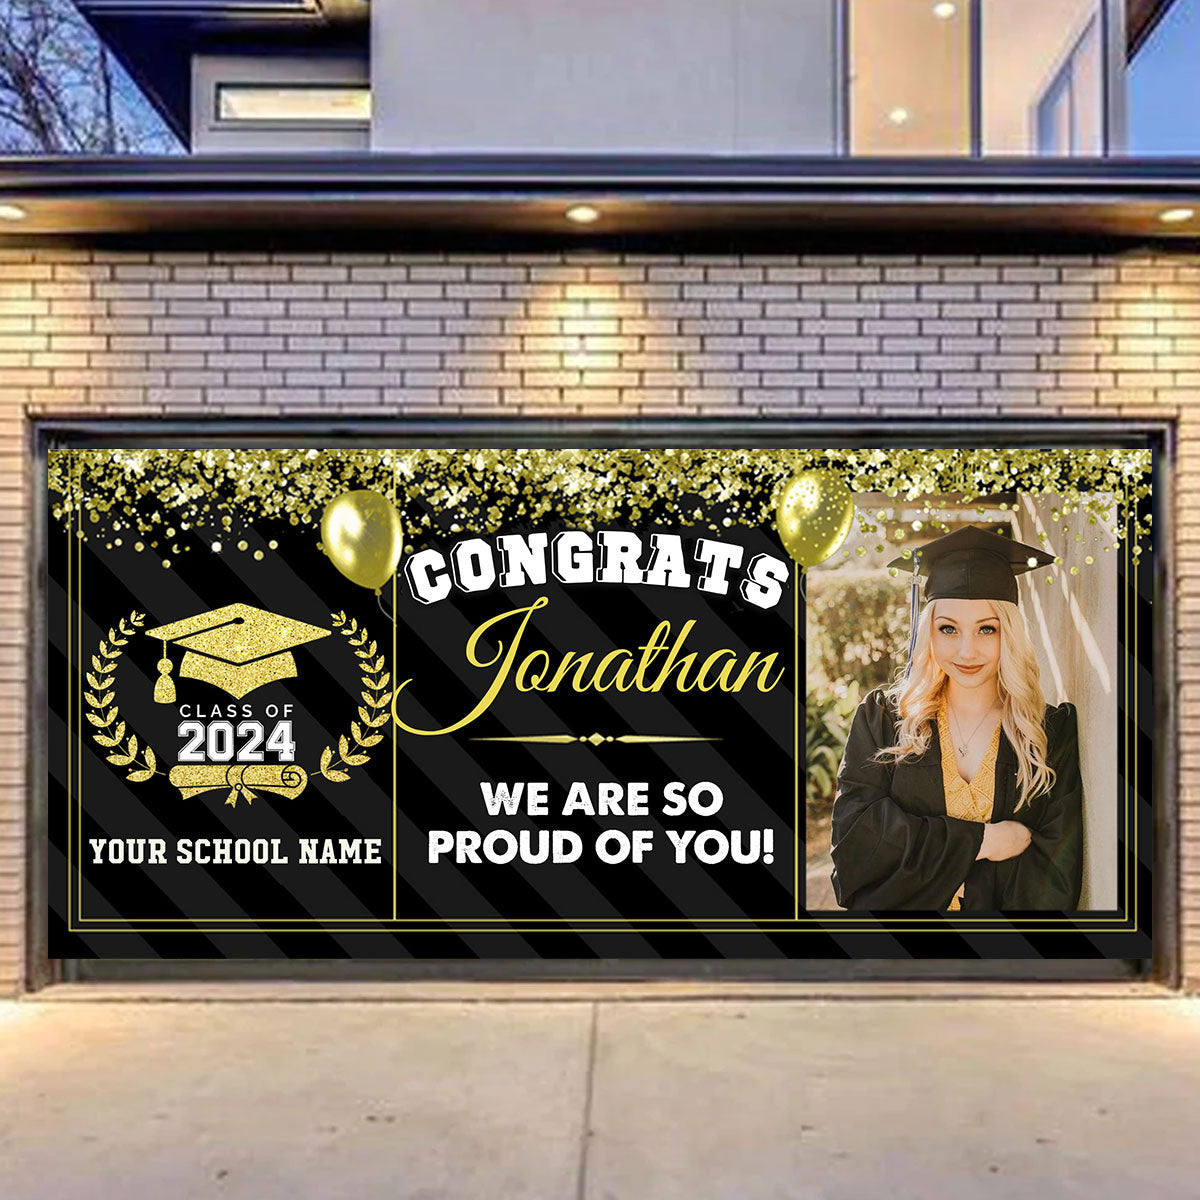 Congrats 2024 We Are So Proud Of You! - Personalized Photo, Your Name And School Name Single Garage, Garage Door Banner Covers - Garage Door Banner Decorations